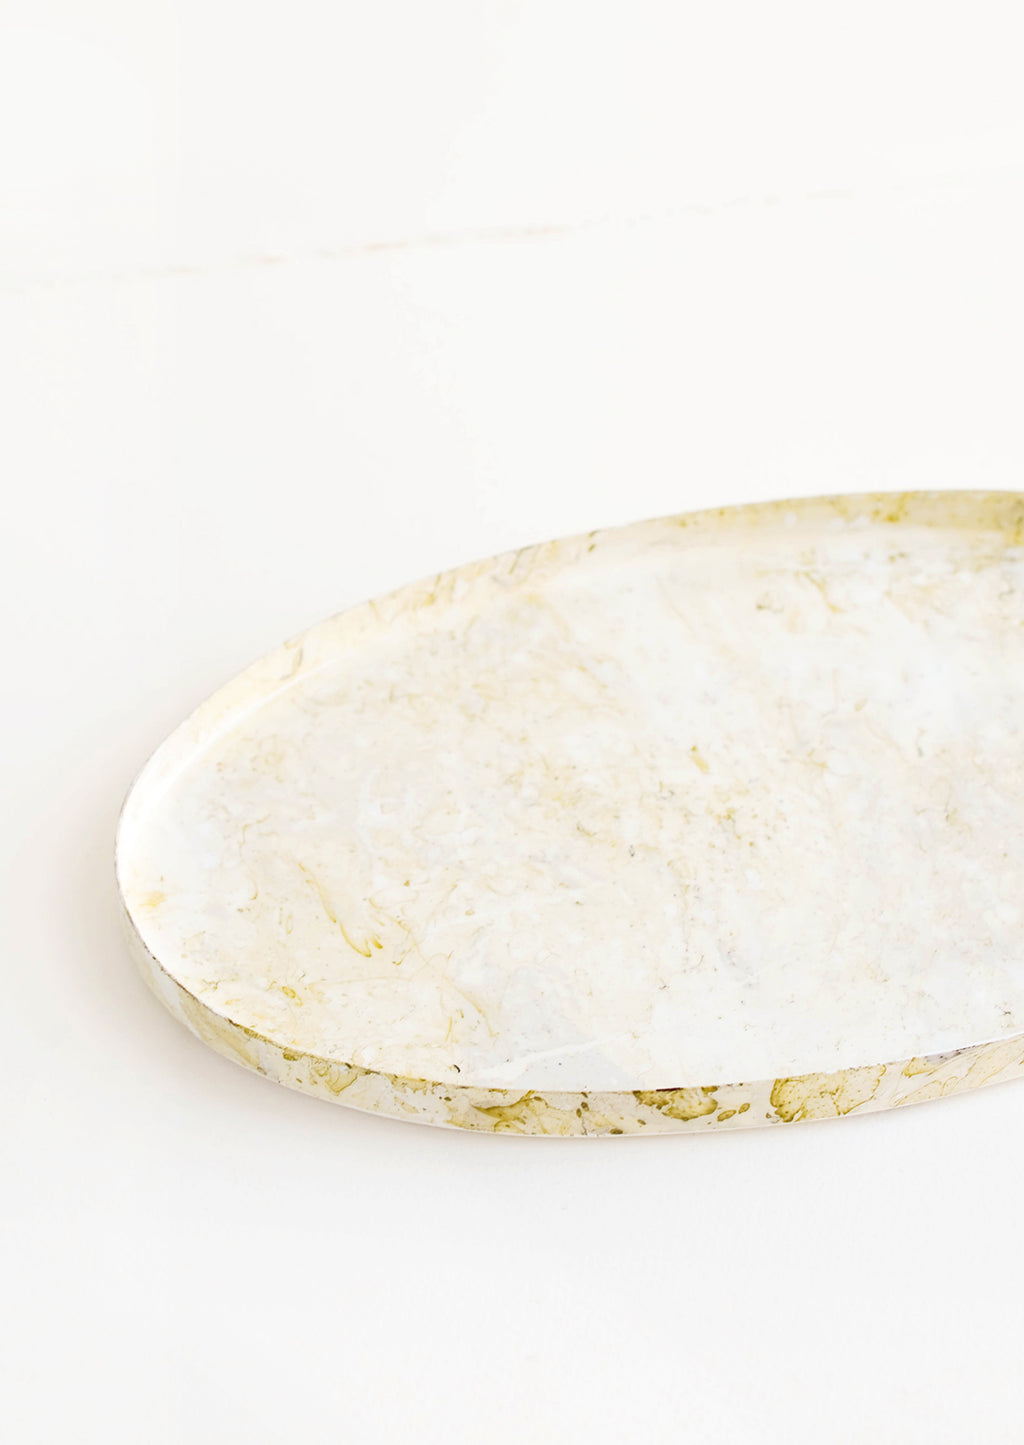 2: Alternative view of oval shaped decorative tray with lipped rim, covered in a shiny enamel finish in an off-white, marble-like pattern.